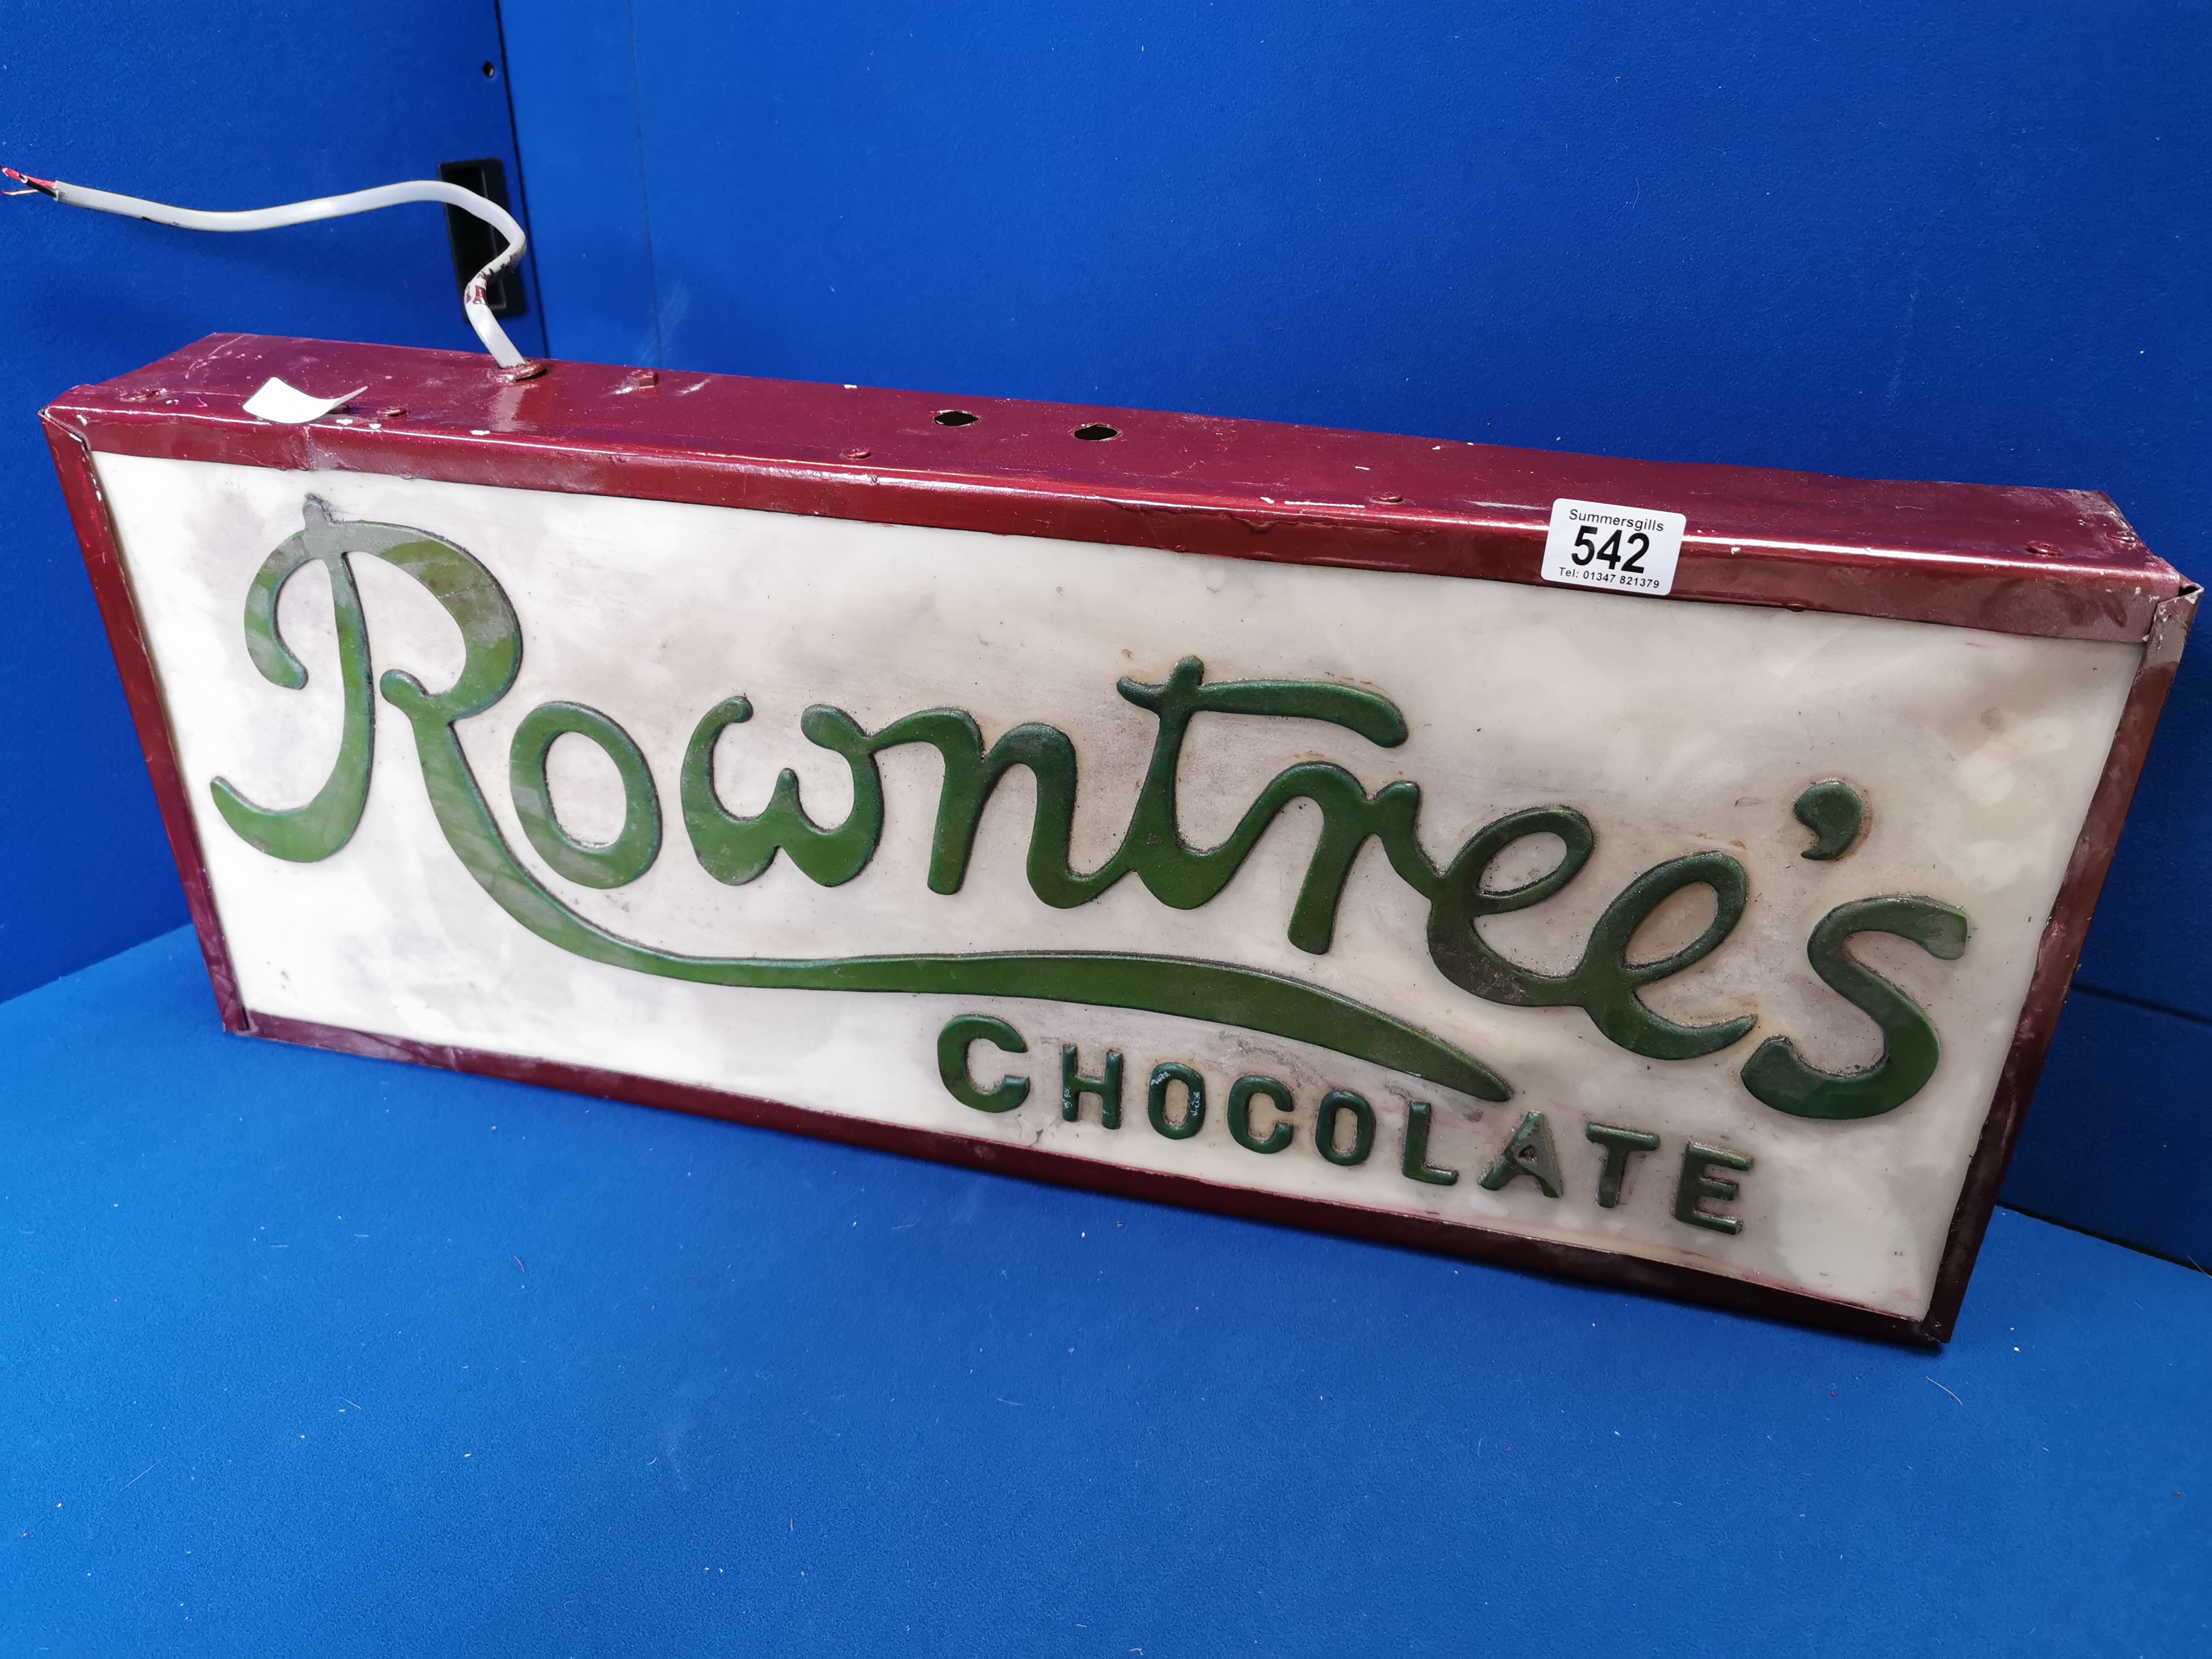 Rowntrees Electric Lightbox Advertising Sign